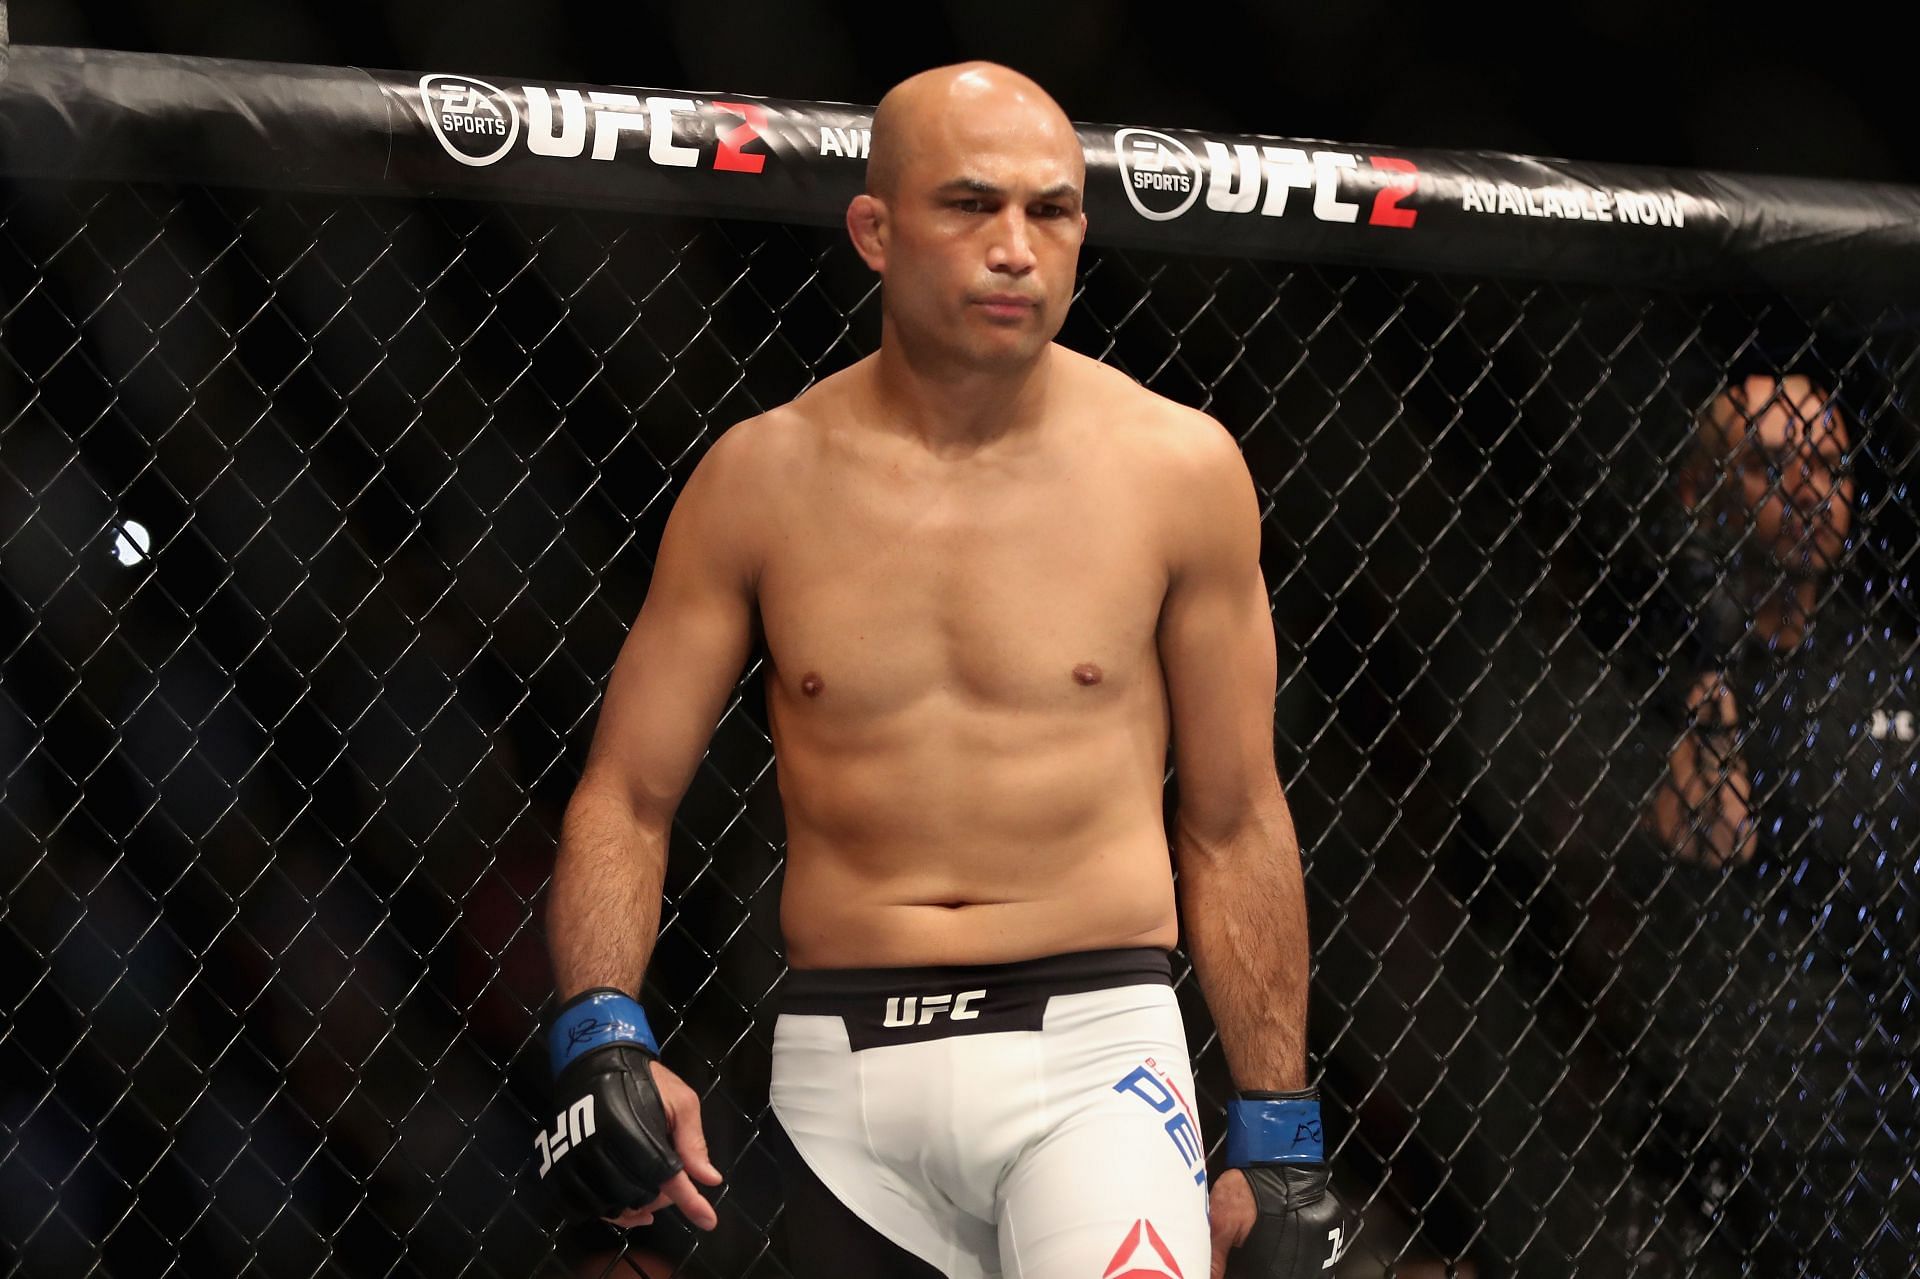 Hall of Famer and former two-division champion B.J. Penn